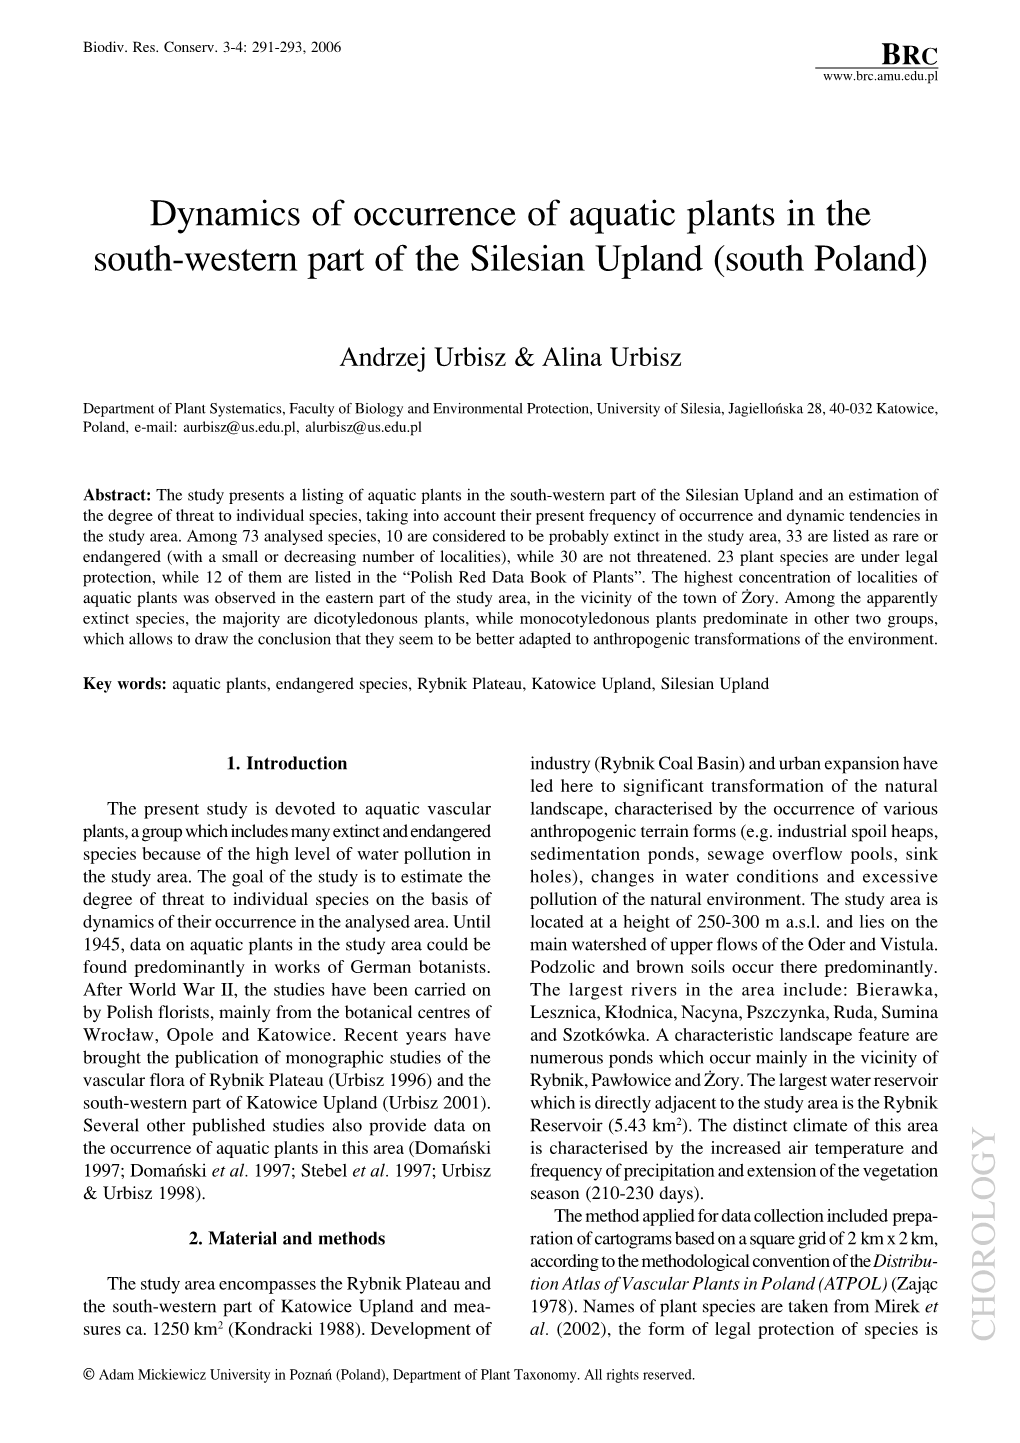 Dynamics of Occurrence of Aquatic Plants in the South-Western Part of the Silesian Upland (South Poland)